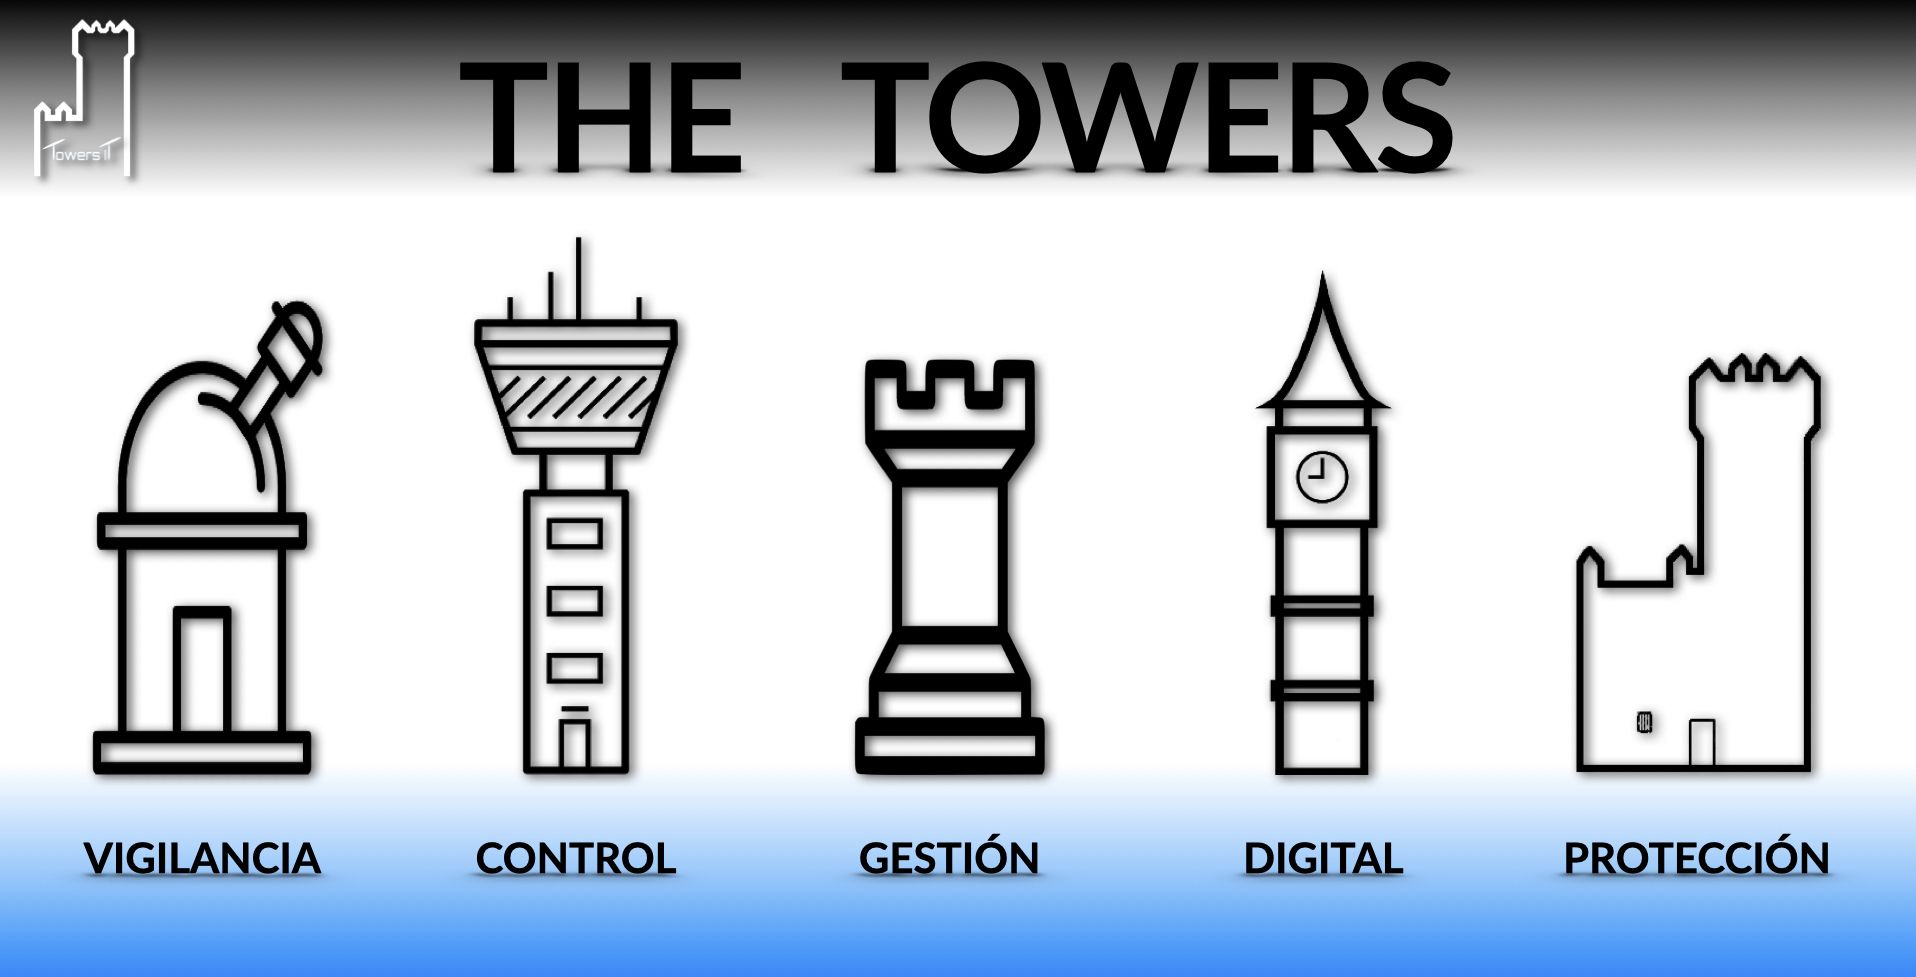 THE TOWERS